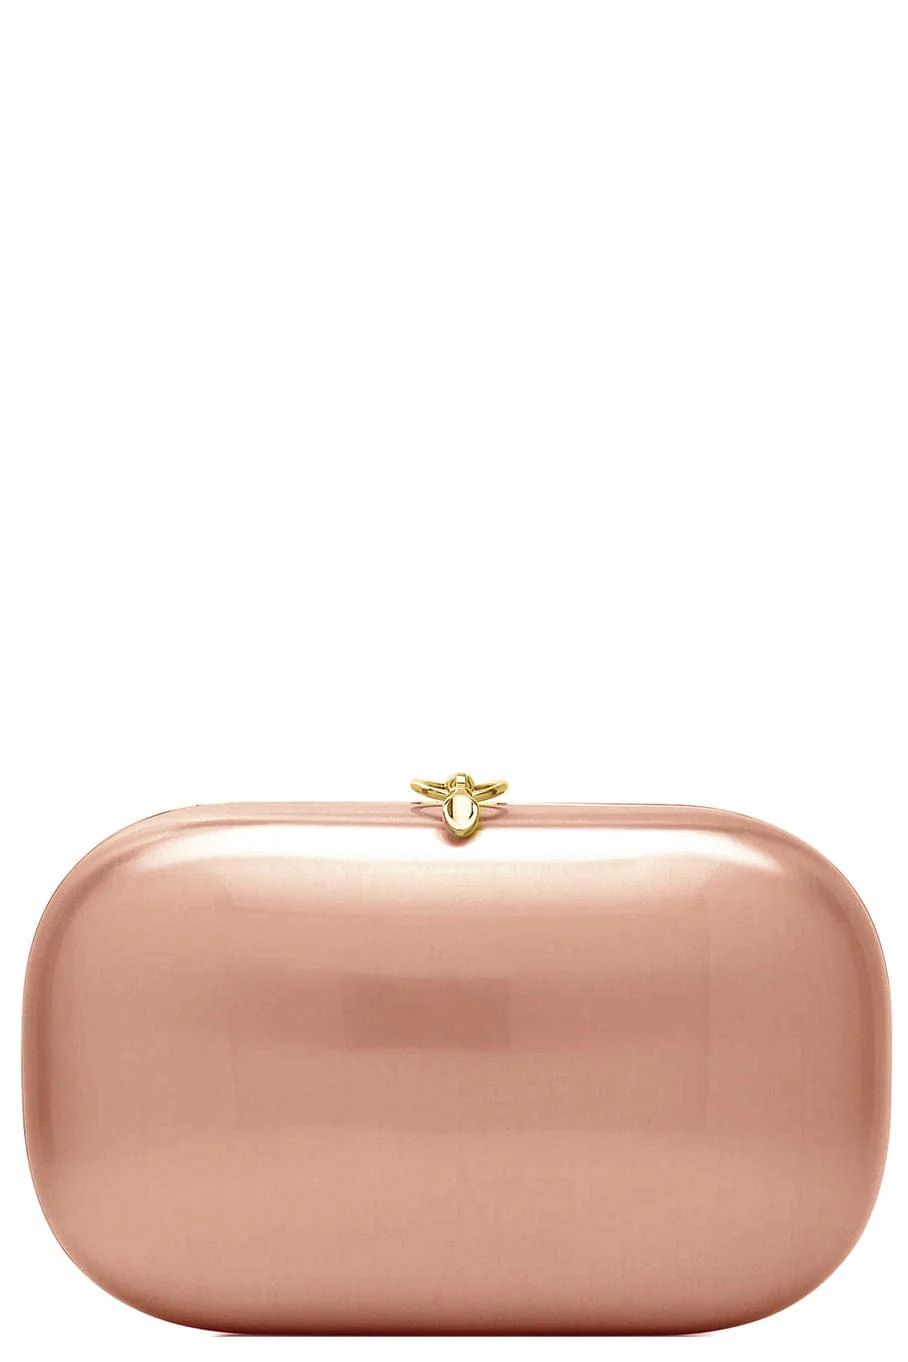 Elina Plus Clutch - Rosegold | Marissa Collections